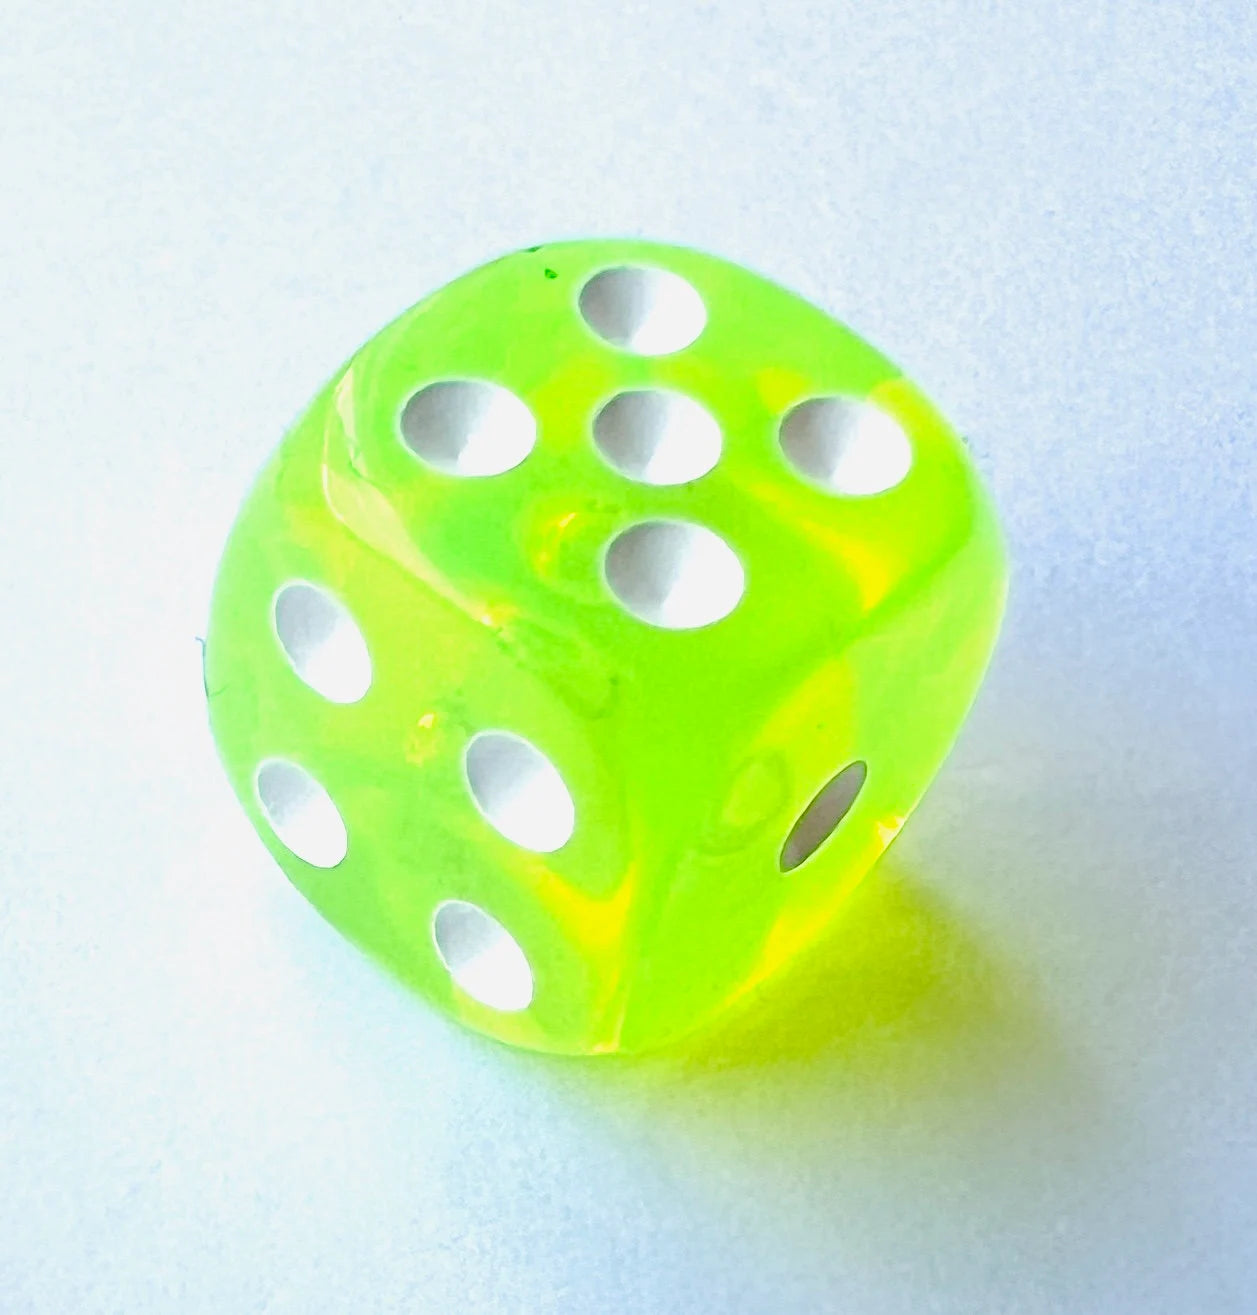 Colored Dice - 4 translucent "neon" colors - 4 pack or singles